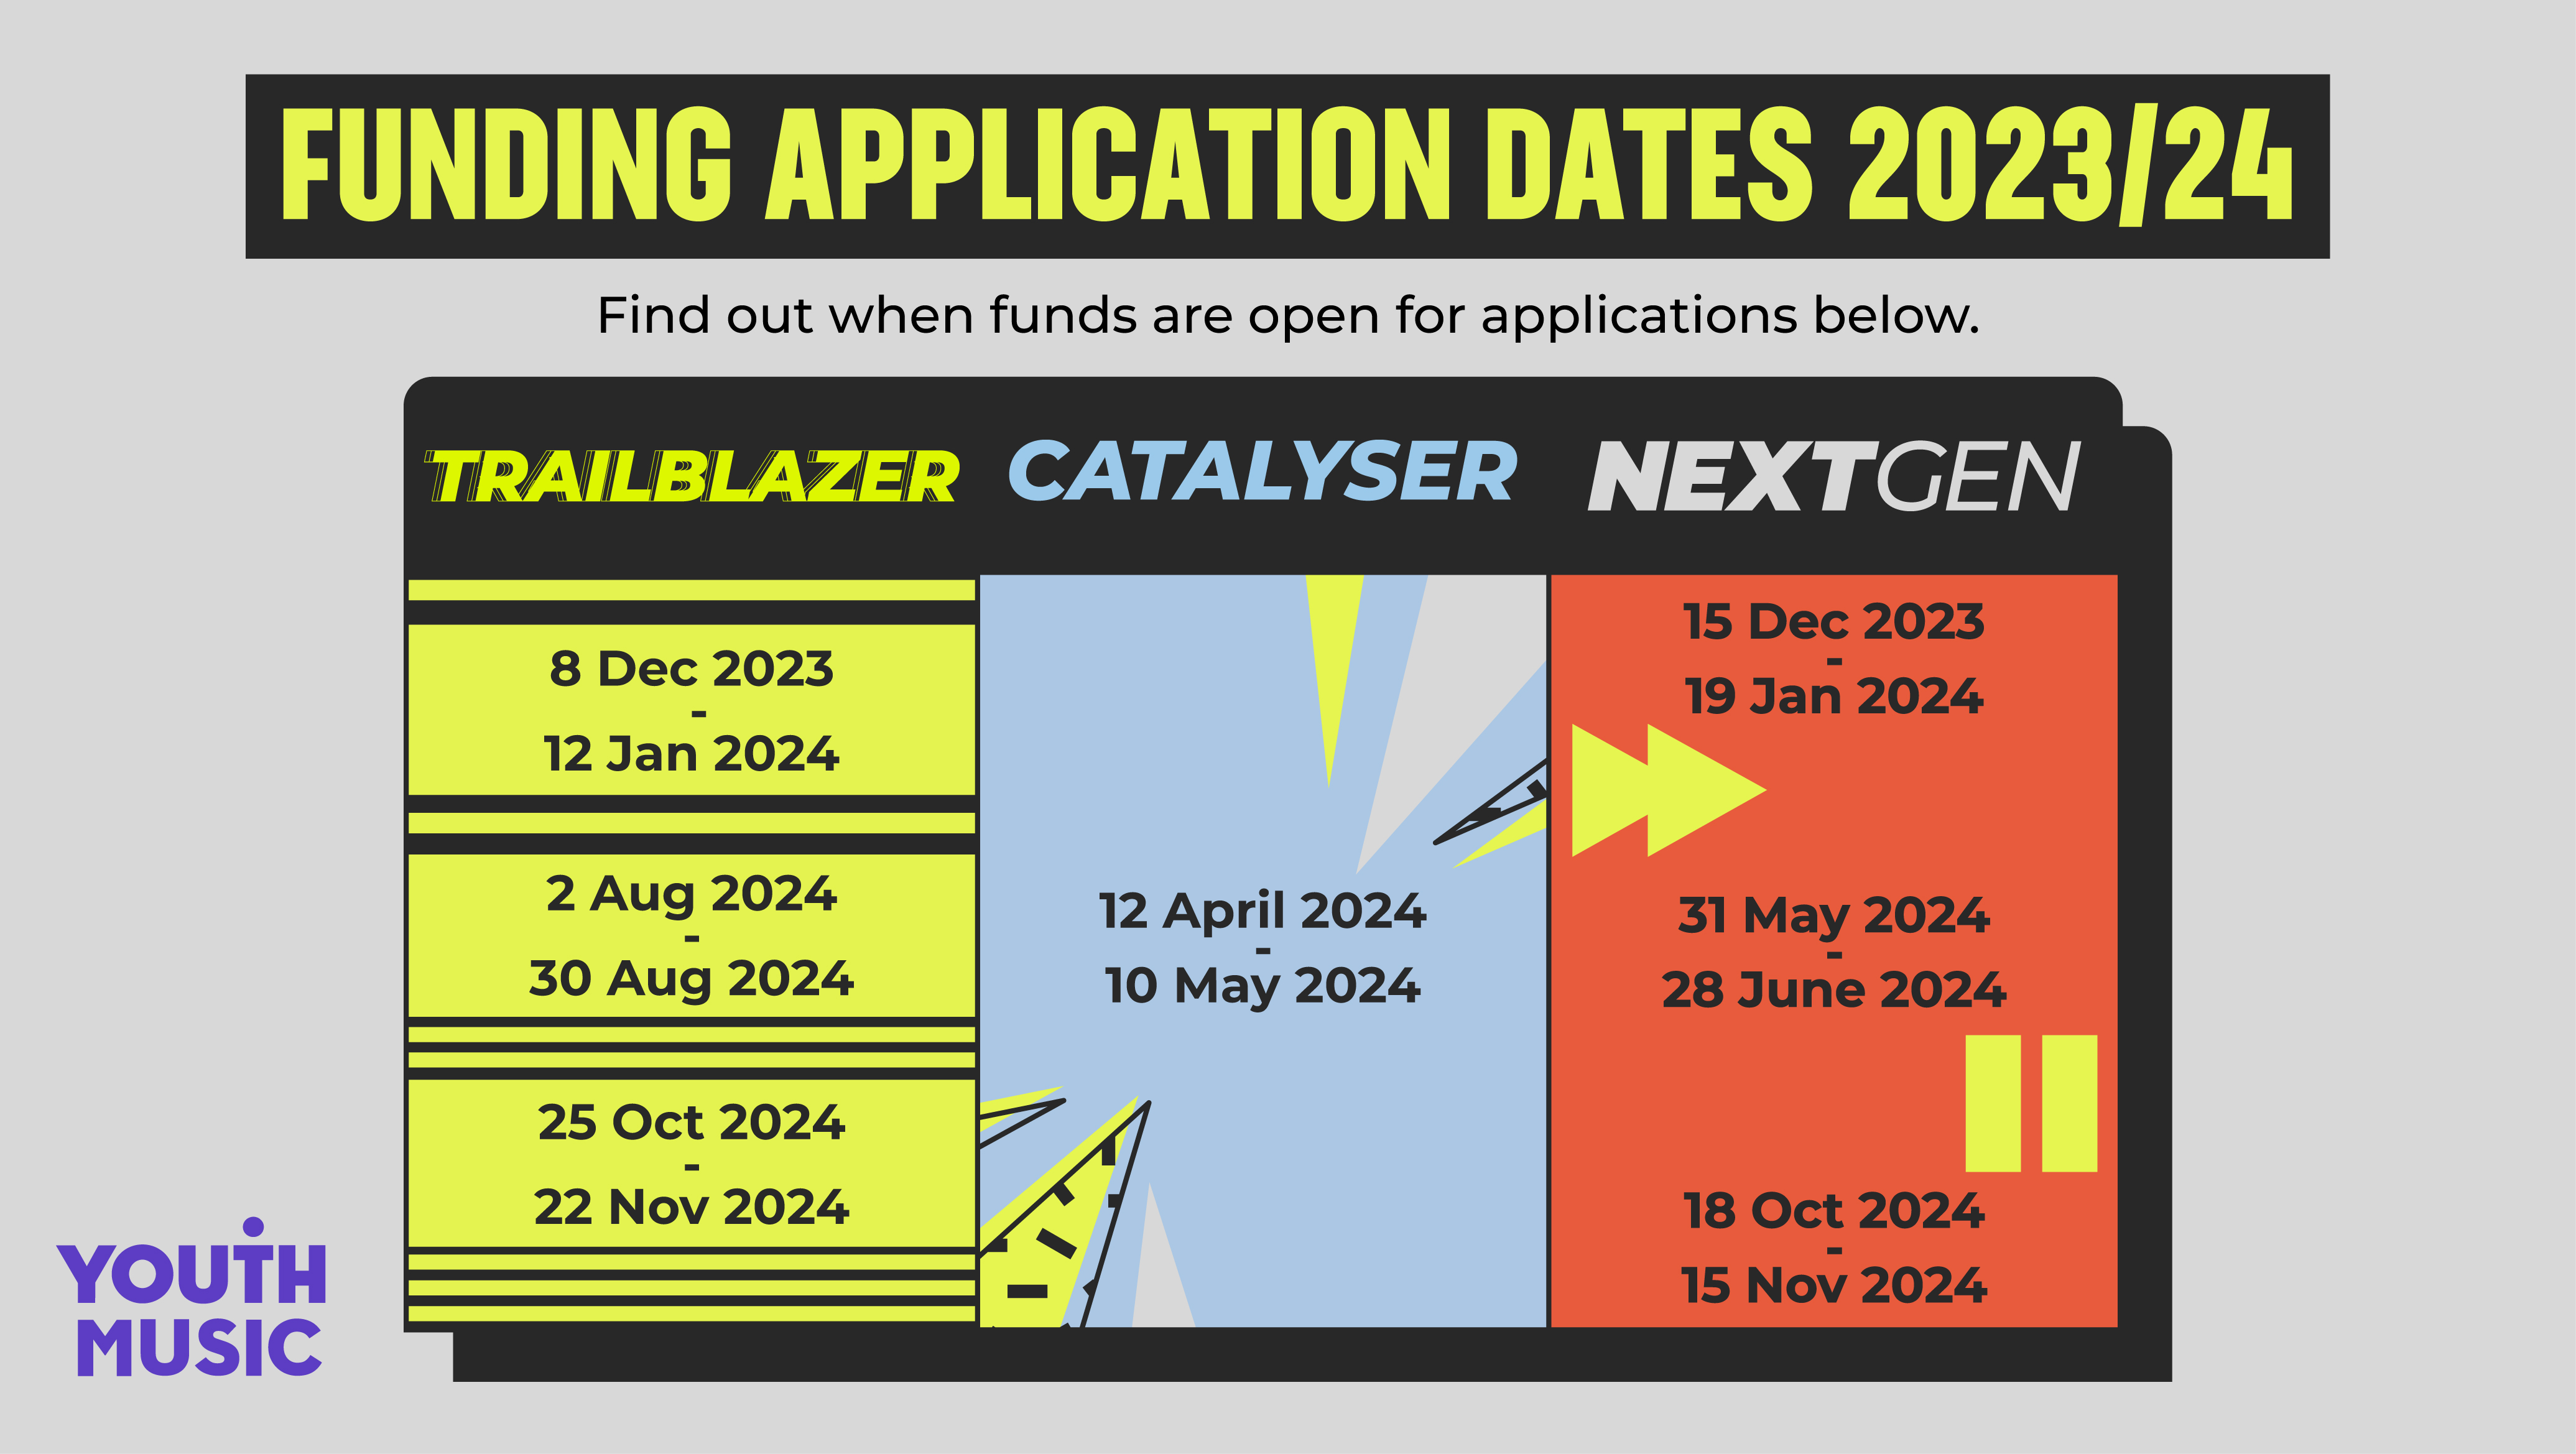 Funding Application Dates 2023/2024.  Dates are listed here or you can find all the dates on the Youth Music Network  - https://network.youthmusic.org.uk/i-need-funding  The Trailblazer Fund has three funding rounds. The first opens 08 December 2023 and closes 12 January 2024. The second opens 02 August 2024 and closes 30 August 2024. The third opens 25 October 2024 and closes 22 November 2024.  The Catalyser Fund has one round opening 12 April 2024 and closing 10 May 2024.  The Next Gen Fund has three funding rounds. The first opens 15 December 2023 and close 19 January 2024. The second opens 31 May 2024 and closes 28 June 2024. The third opens 18 October 2024 and closes 15 November 2024.